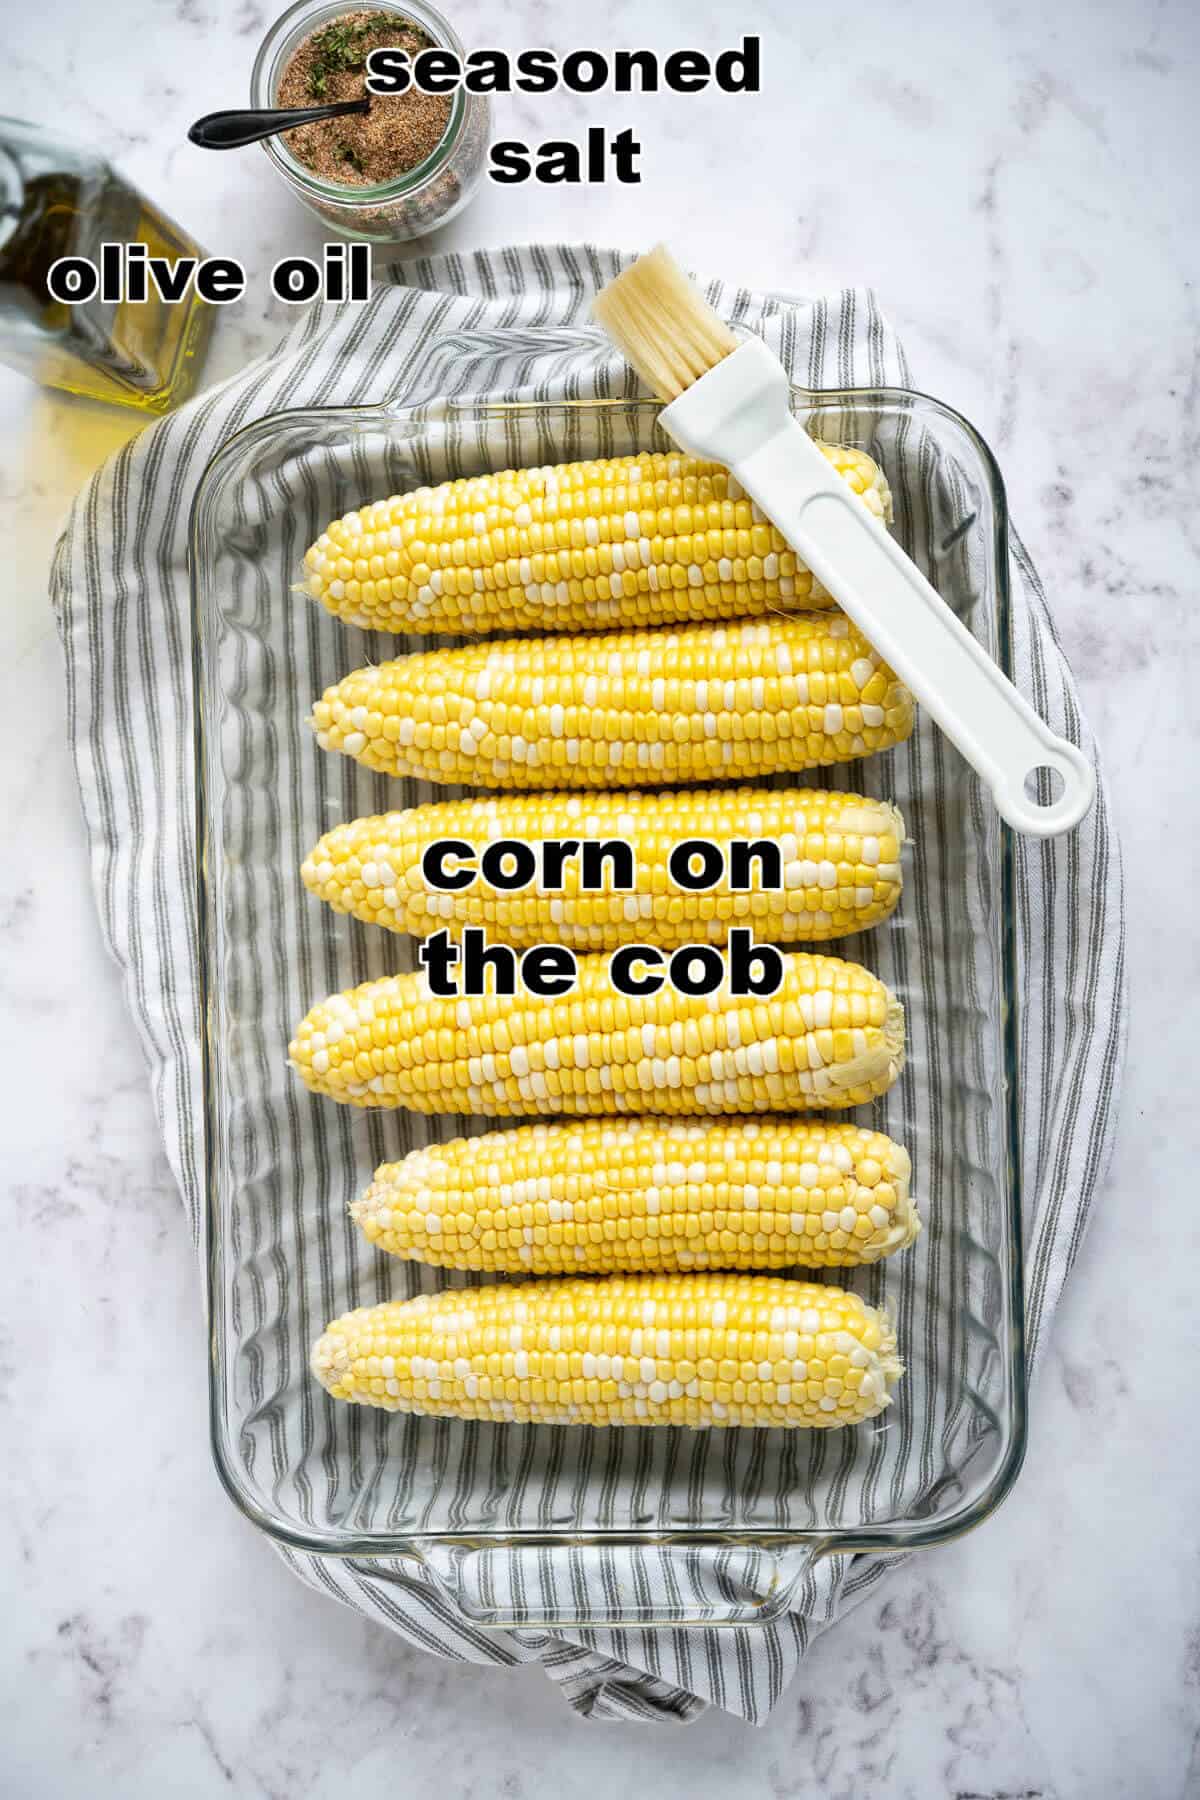 6 ears of raw corn on the cob in a 9x13 dish, bottle of olive oil, a jar of seasoned salt, and a pastry brush.